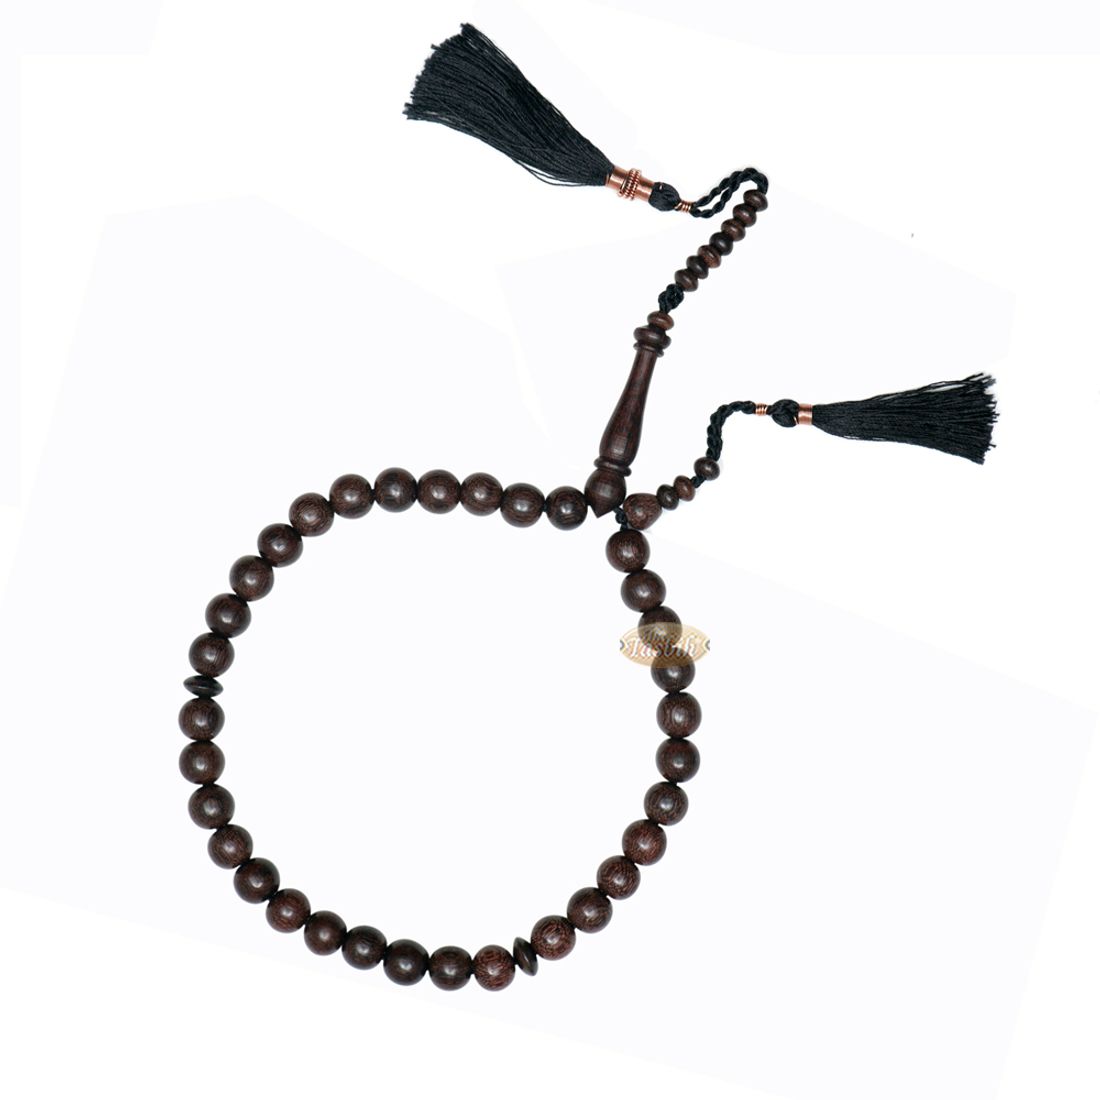 Tasbih Prayer Beads Made from Tamarind Wood with Black Decorated Tassels